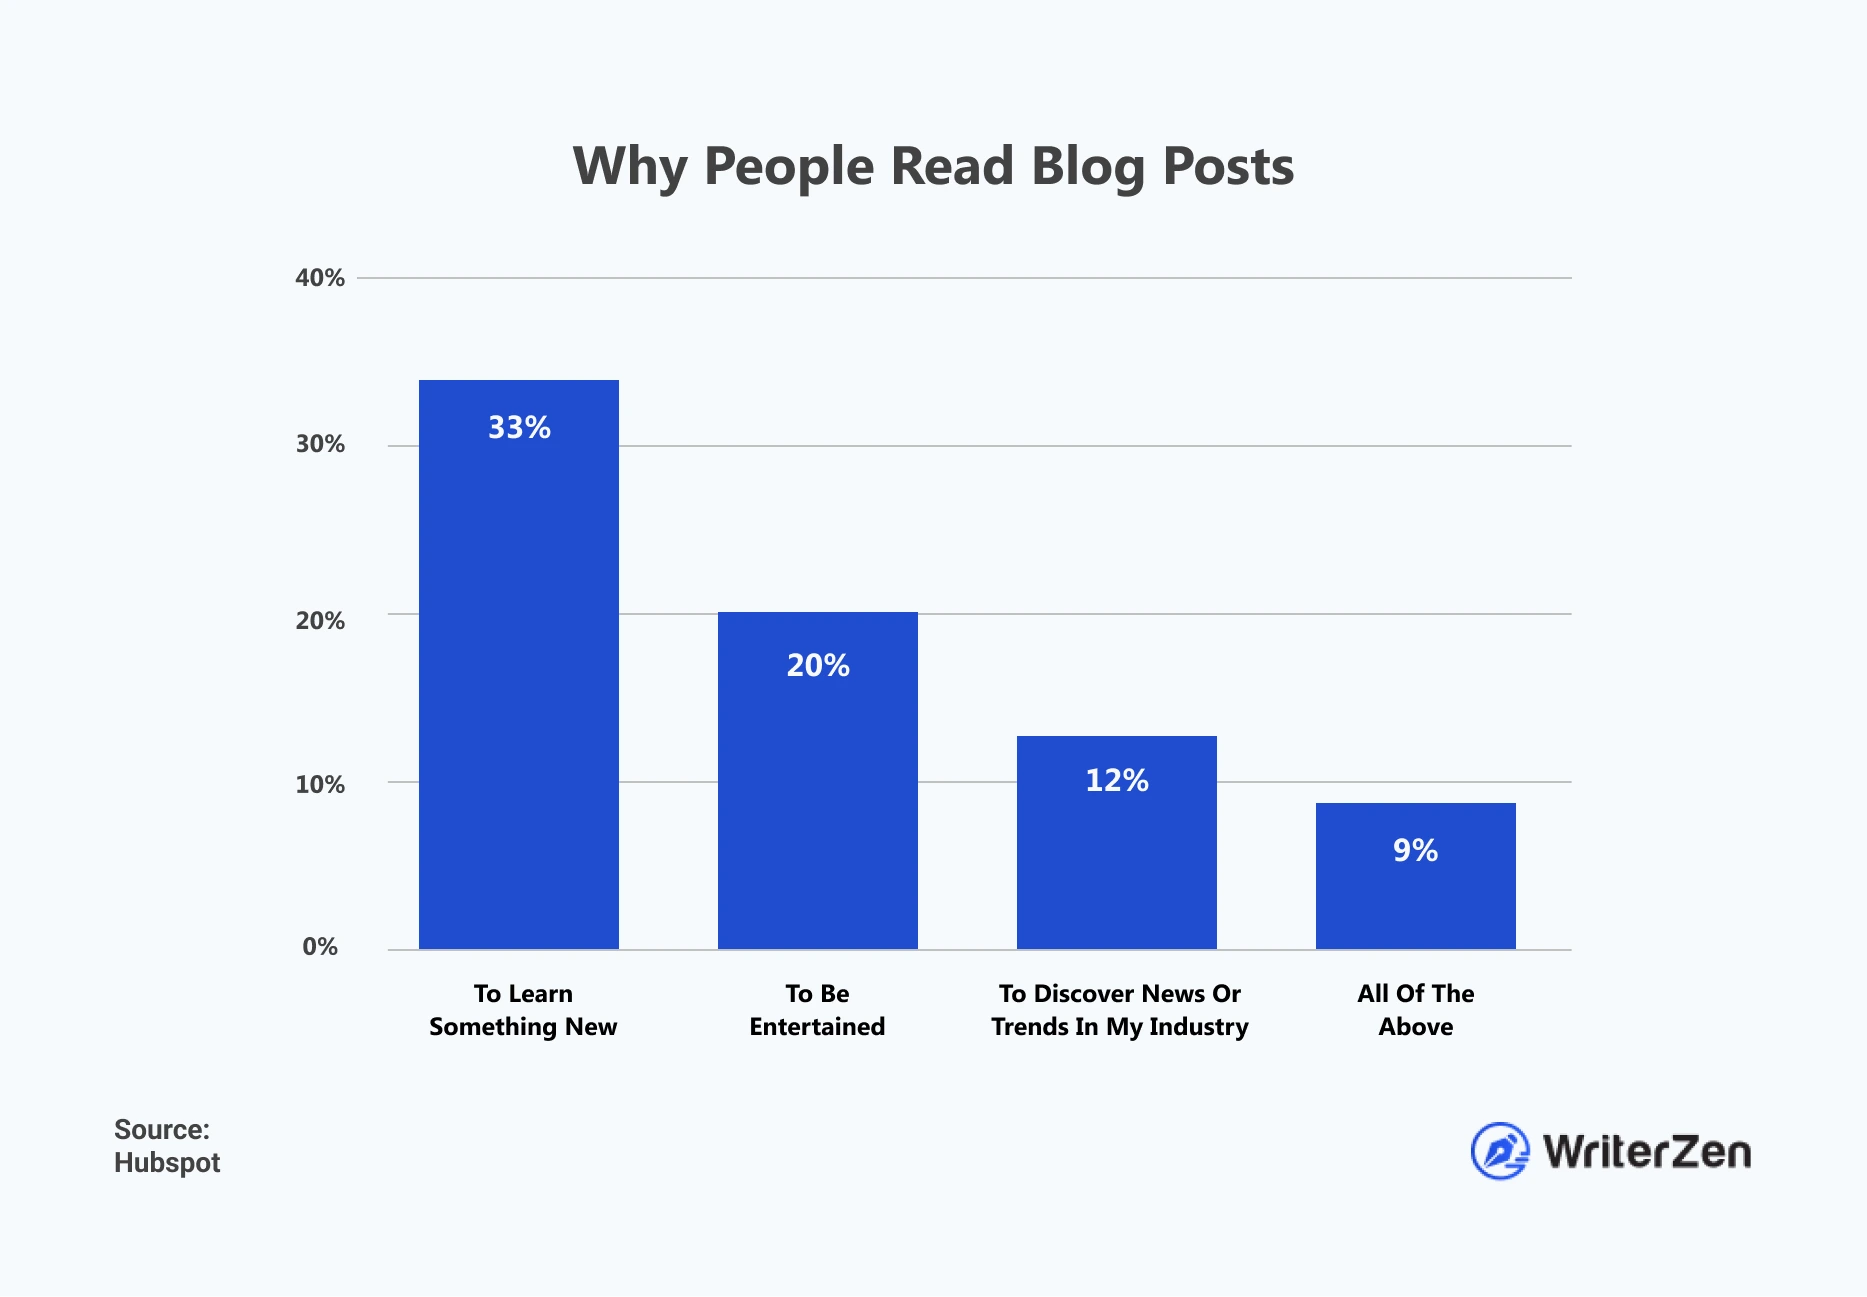 Data why people read blog posts